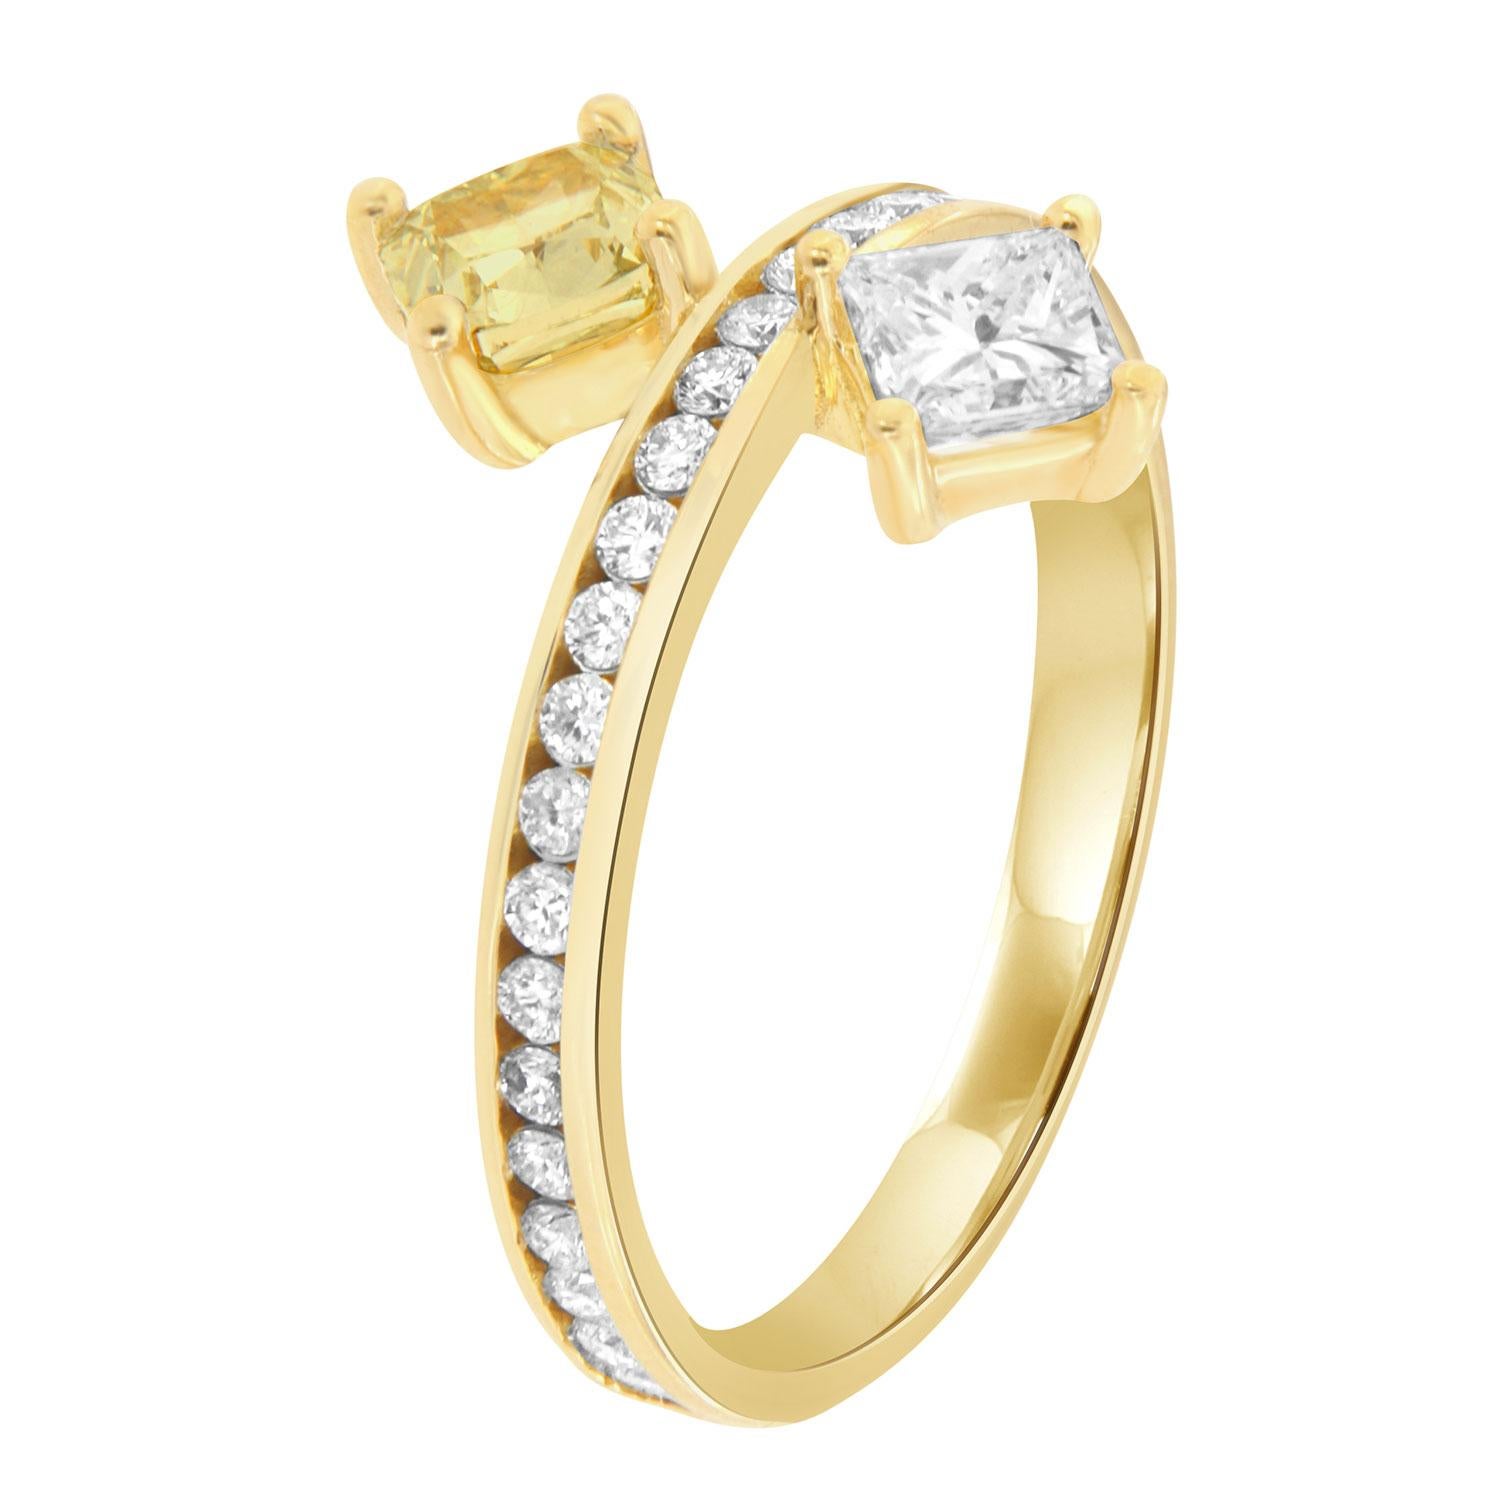 This Fashionable ring features a 0.52 Cushion Shape Yellow Diamond GIA Certified four (4) prong set across of 0.38-carat princess shape white diaomnd on top of 2.3 mm wide band.  Brilliant round diamonds in weight of 0.35 carat are channel set on